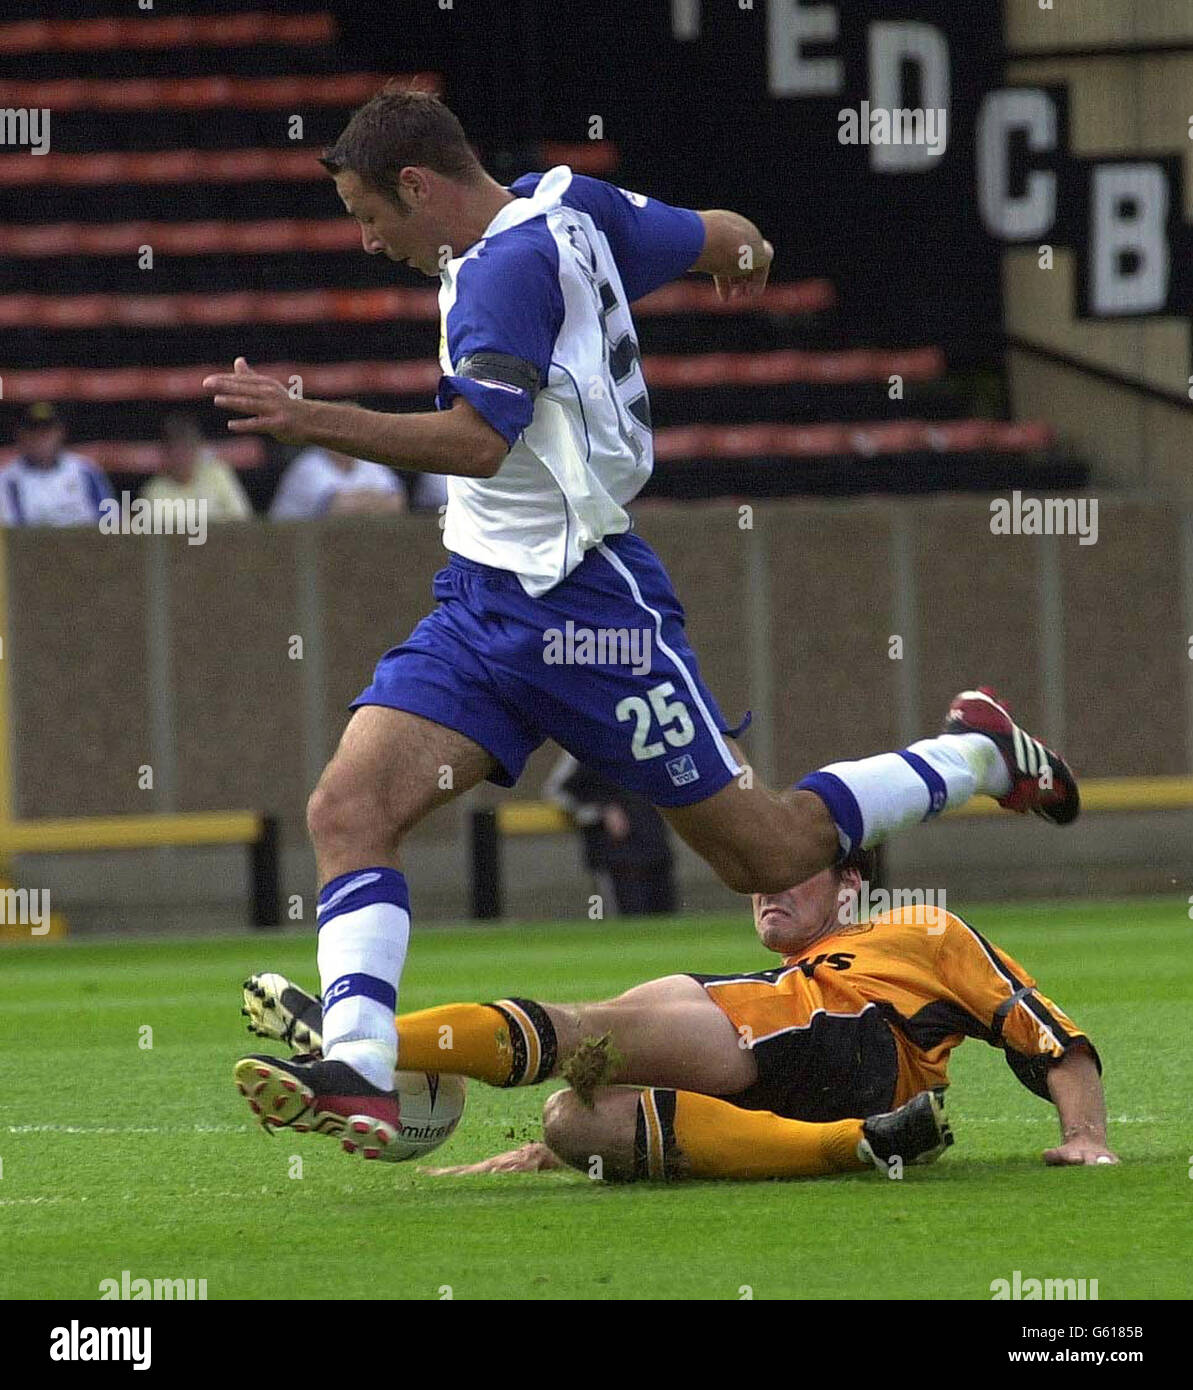 Hull City's Mark Greaves slides in for a tackle on Bury's Pawell Abbott during the Nationwide League Division Three game between Hull City and Bury at Boothferry Park. . Stock Photo